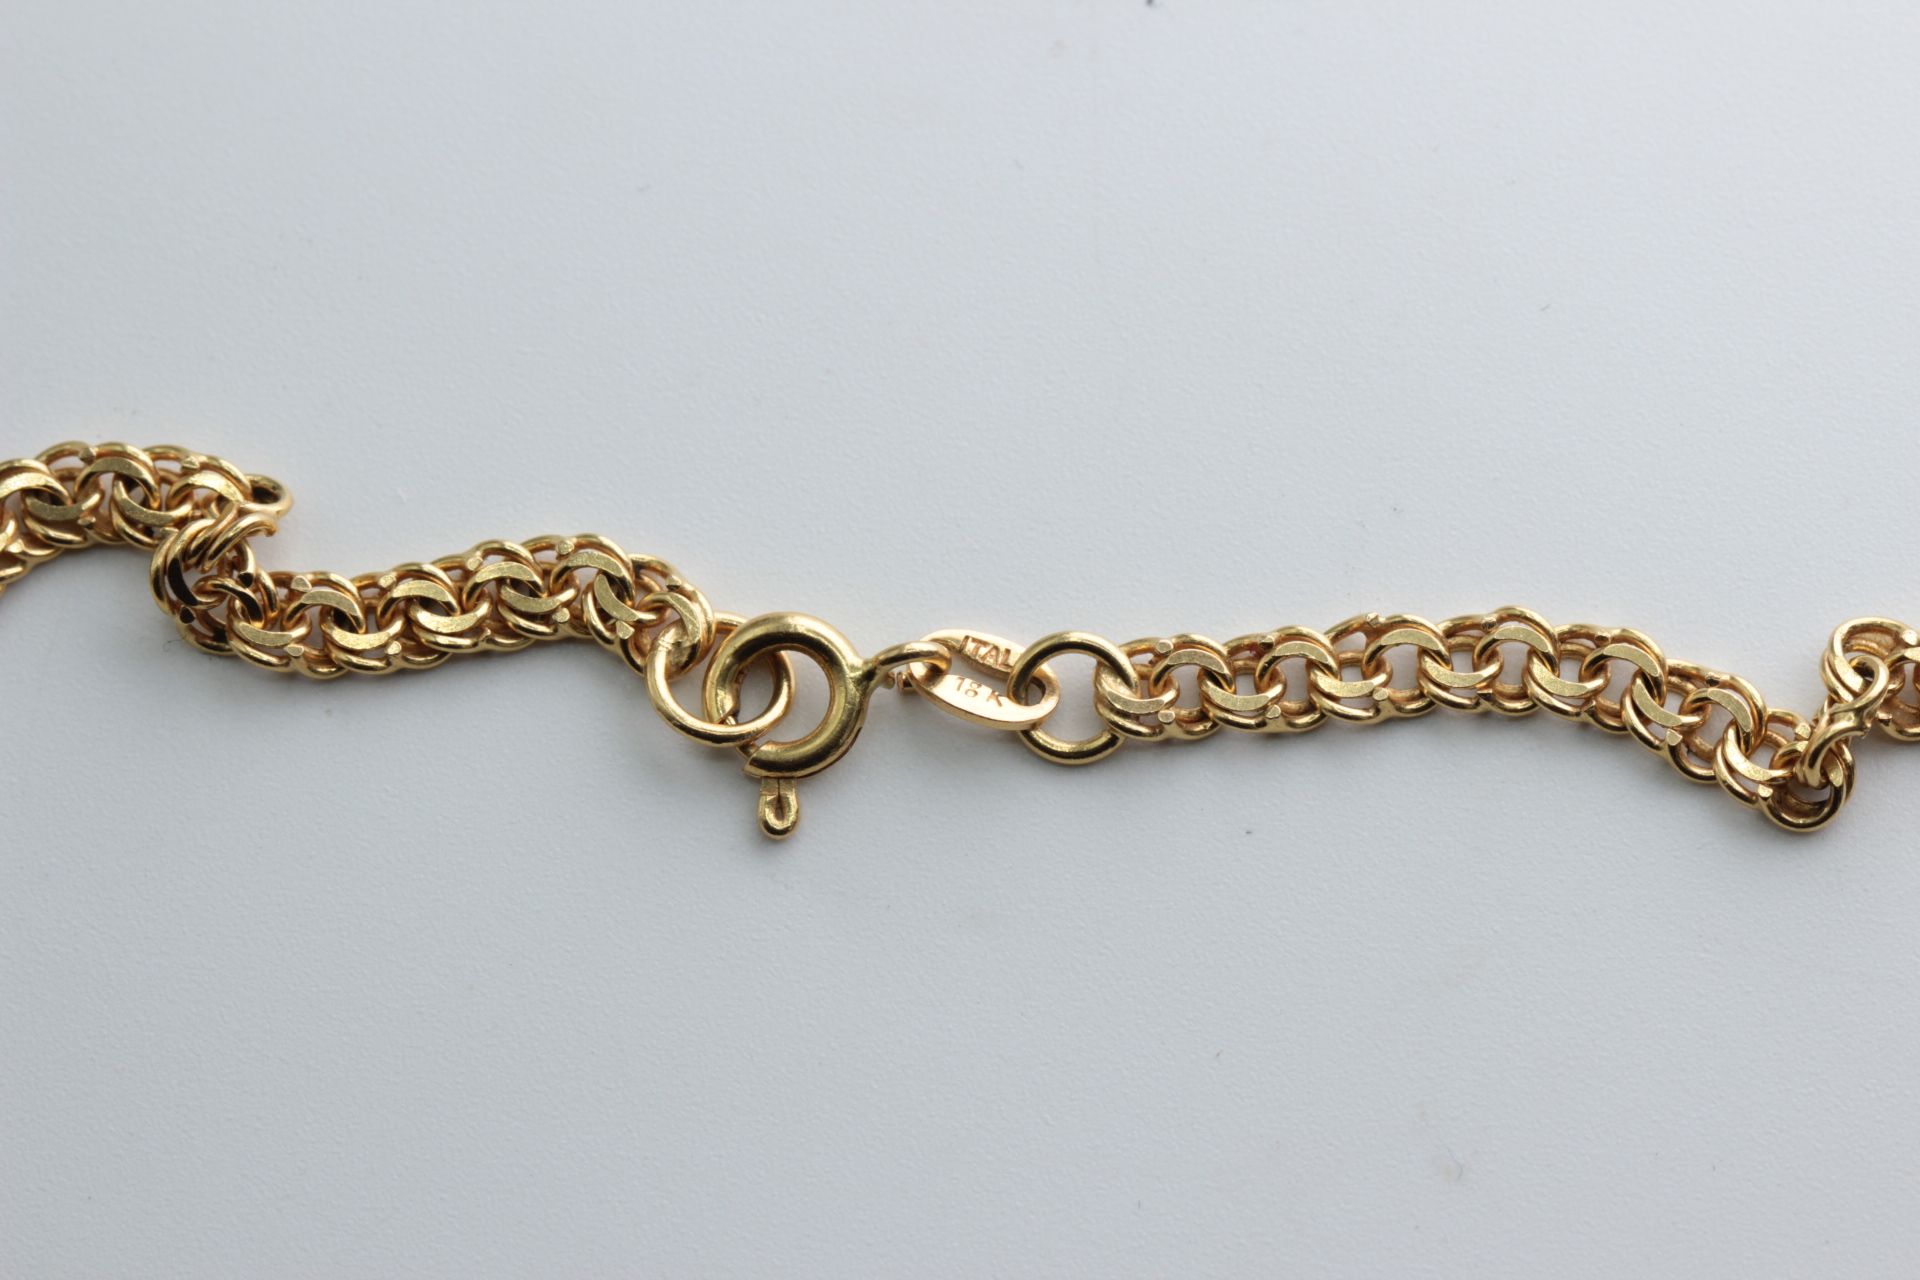 Heavy Cartier Necklace 18K Yellow Gold - Image 4 of 4